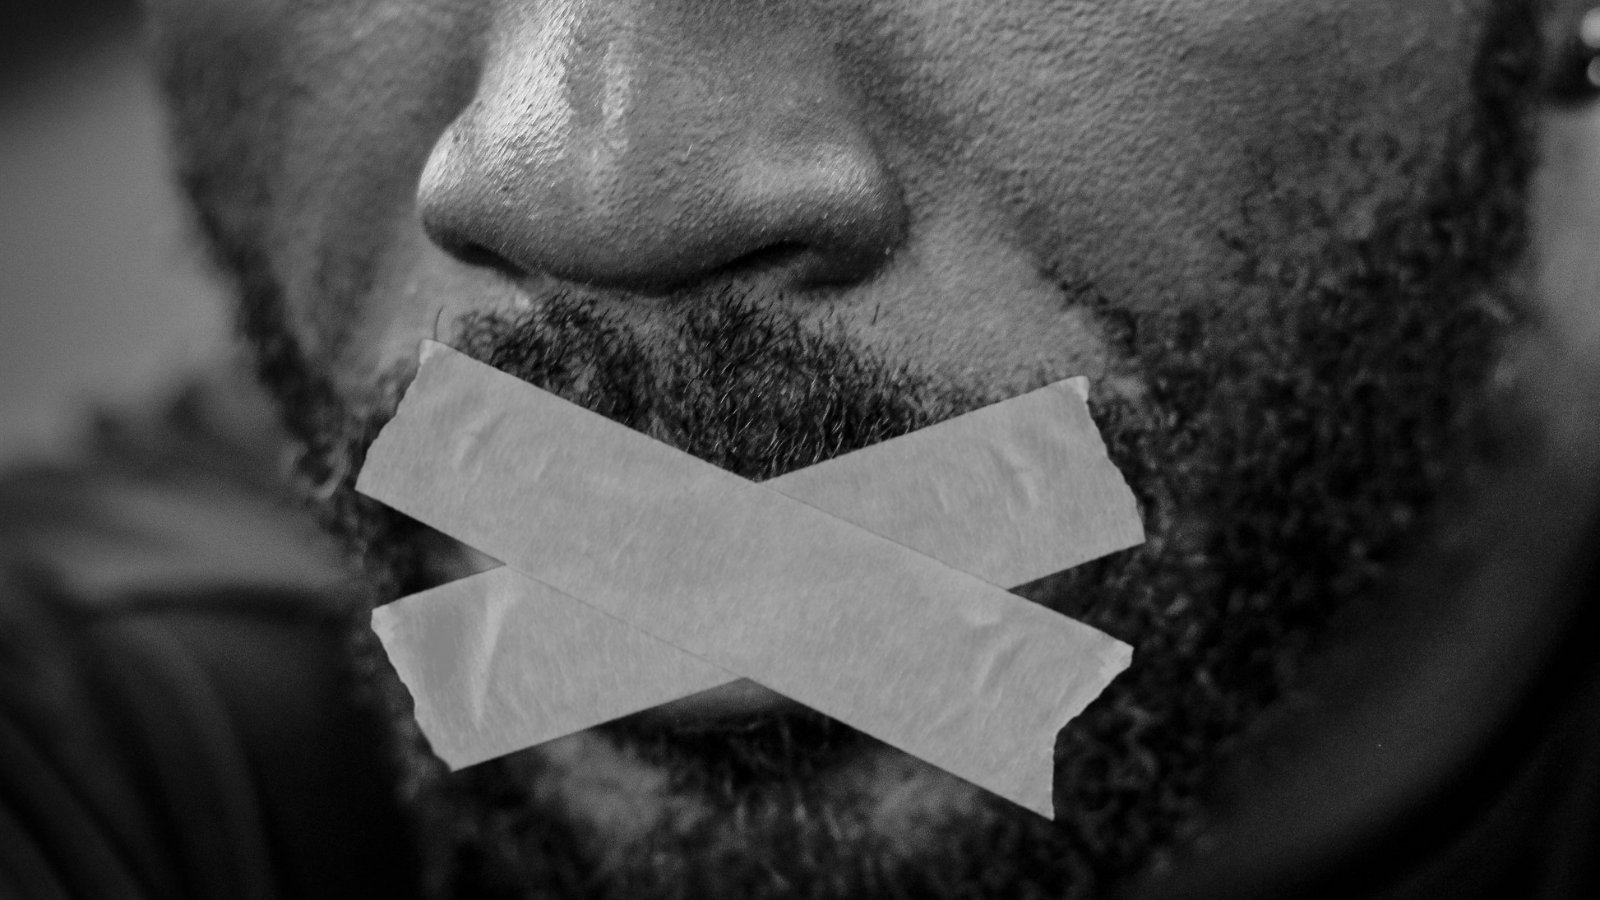 Man with tape over mouth